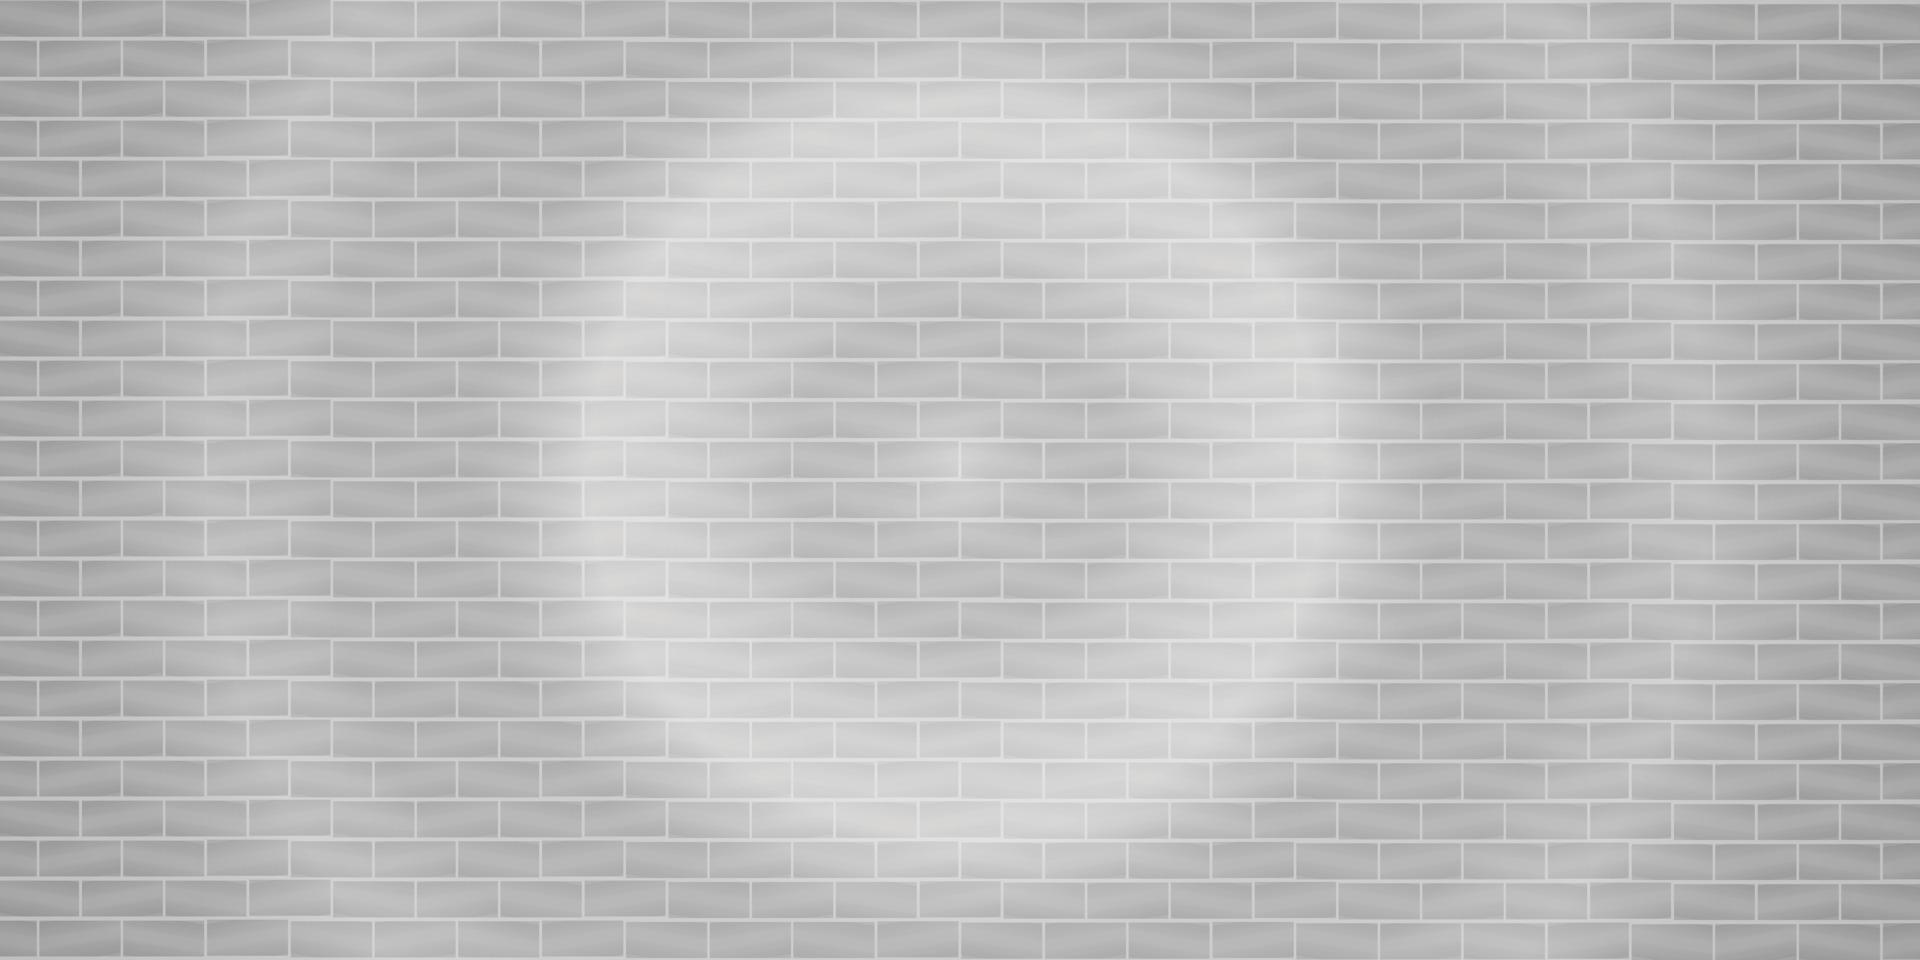 Gray light flare brick wall abstract background texture wallpaper backdrop pattern seamless vector illustration